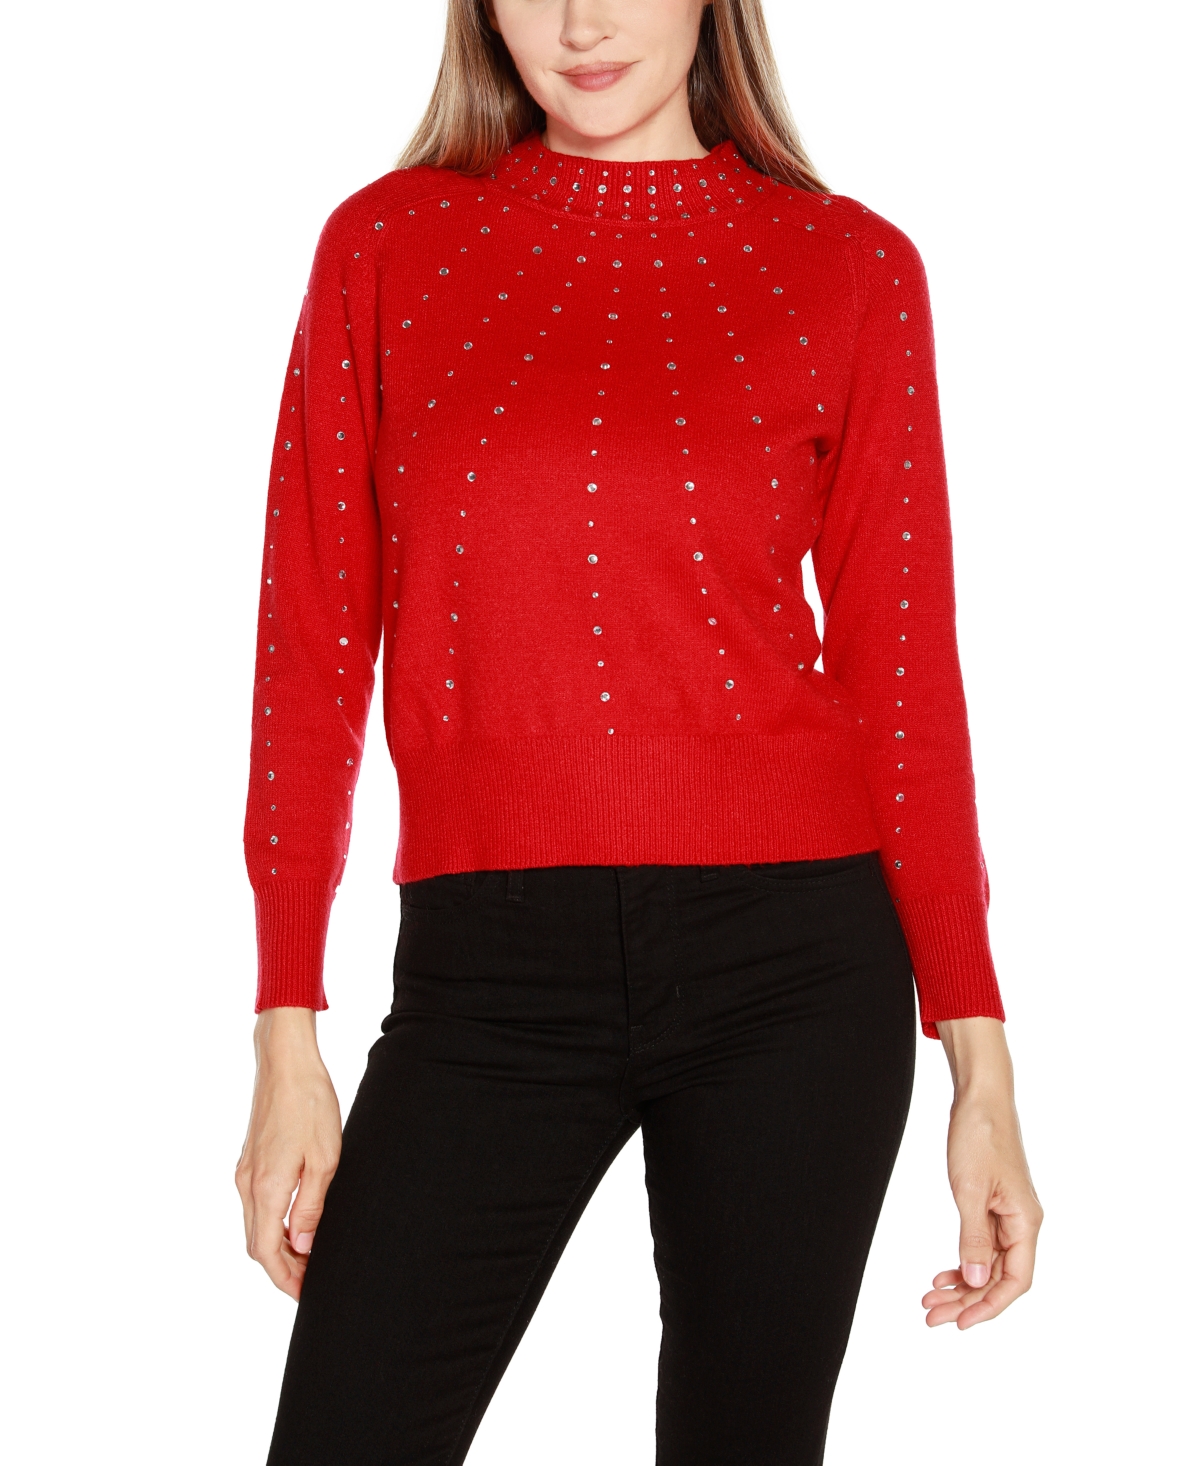 Women's Embellished Sweater - Belldini Red